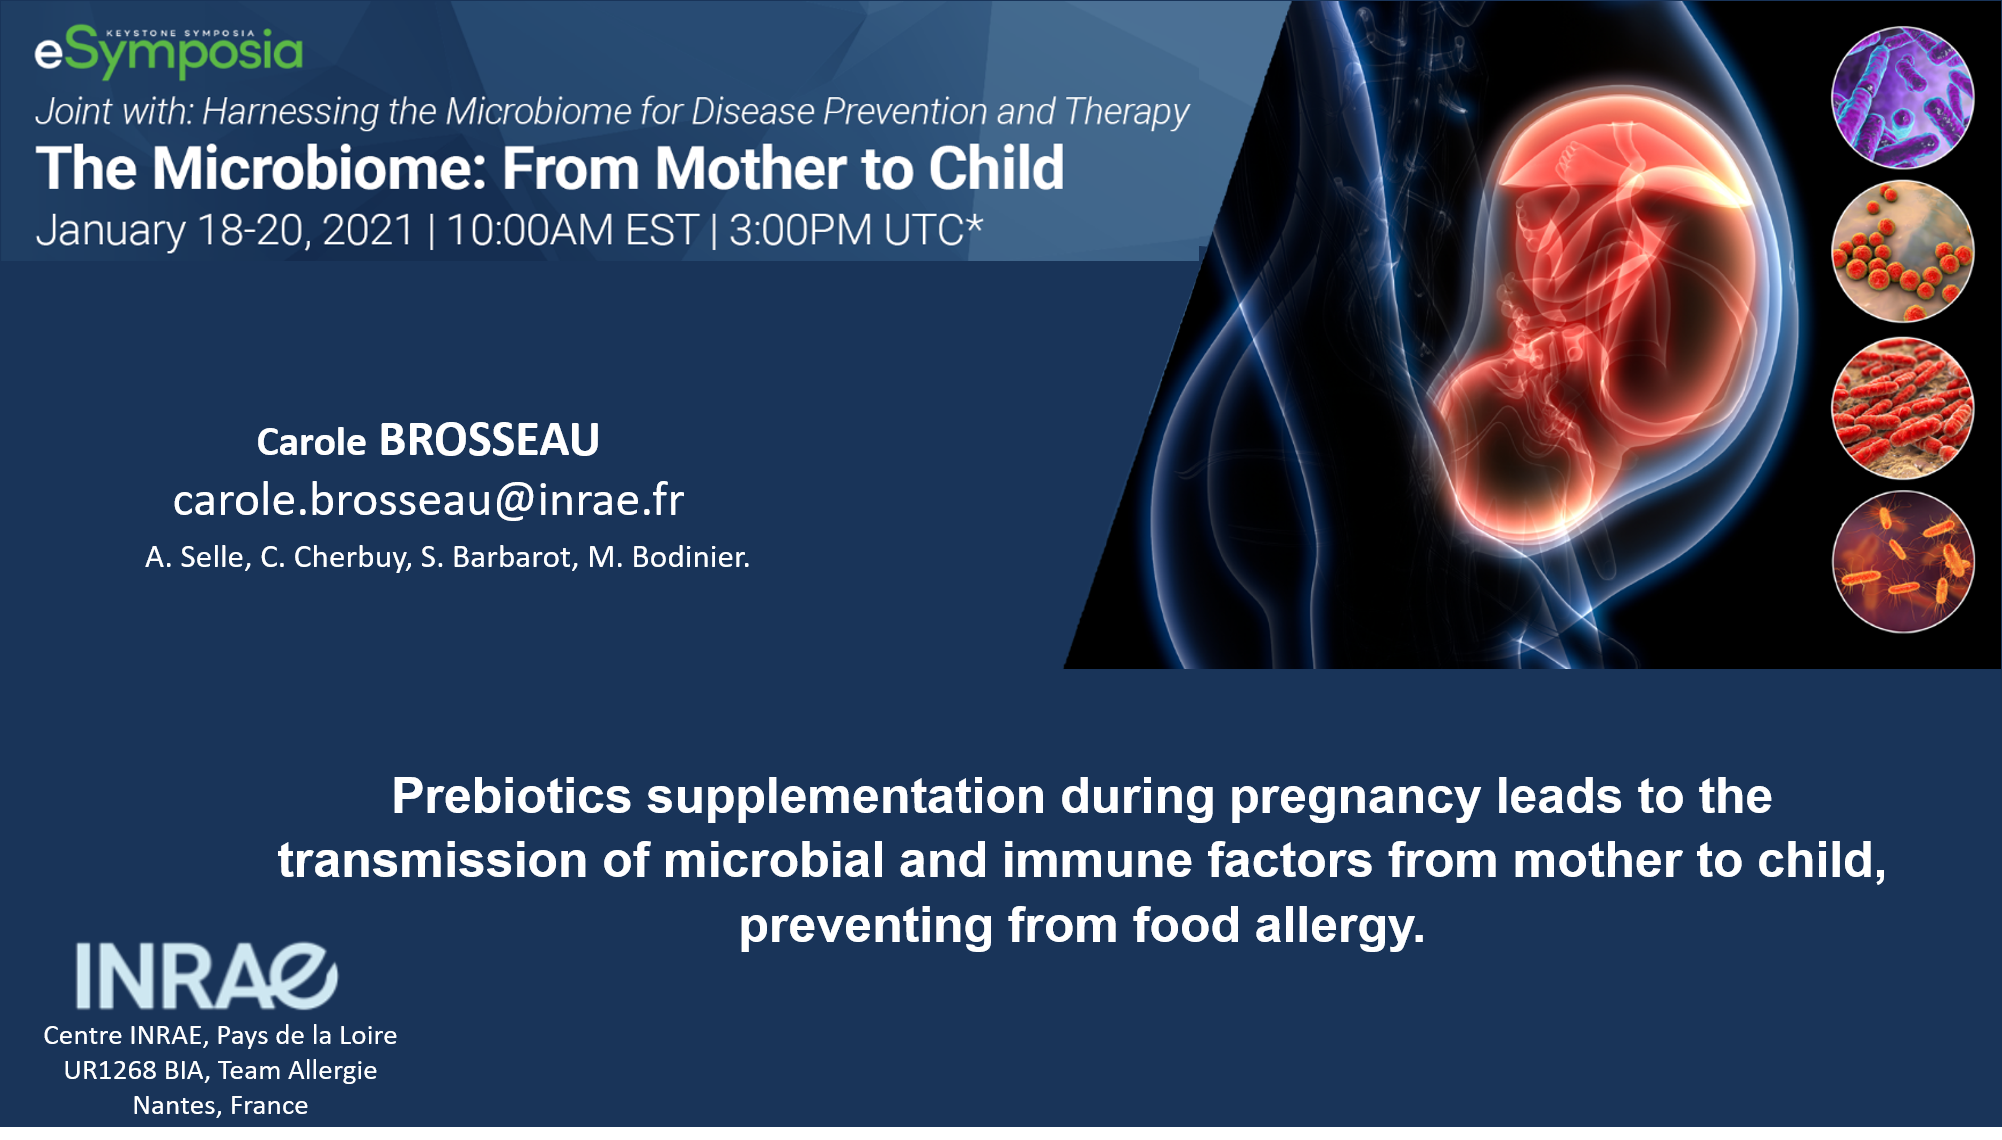 Prebiotics supplementation during pregnancy leads to the transmission of microbial and immune factors from mother to child, preventing from food allergy.